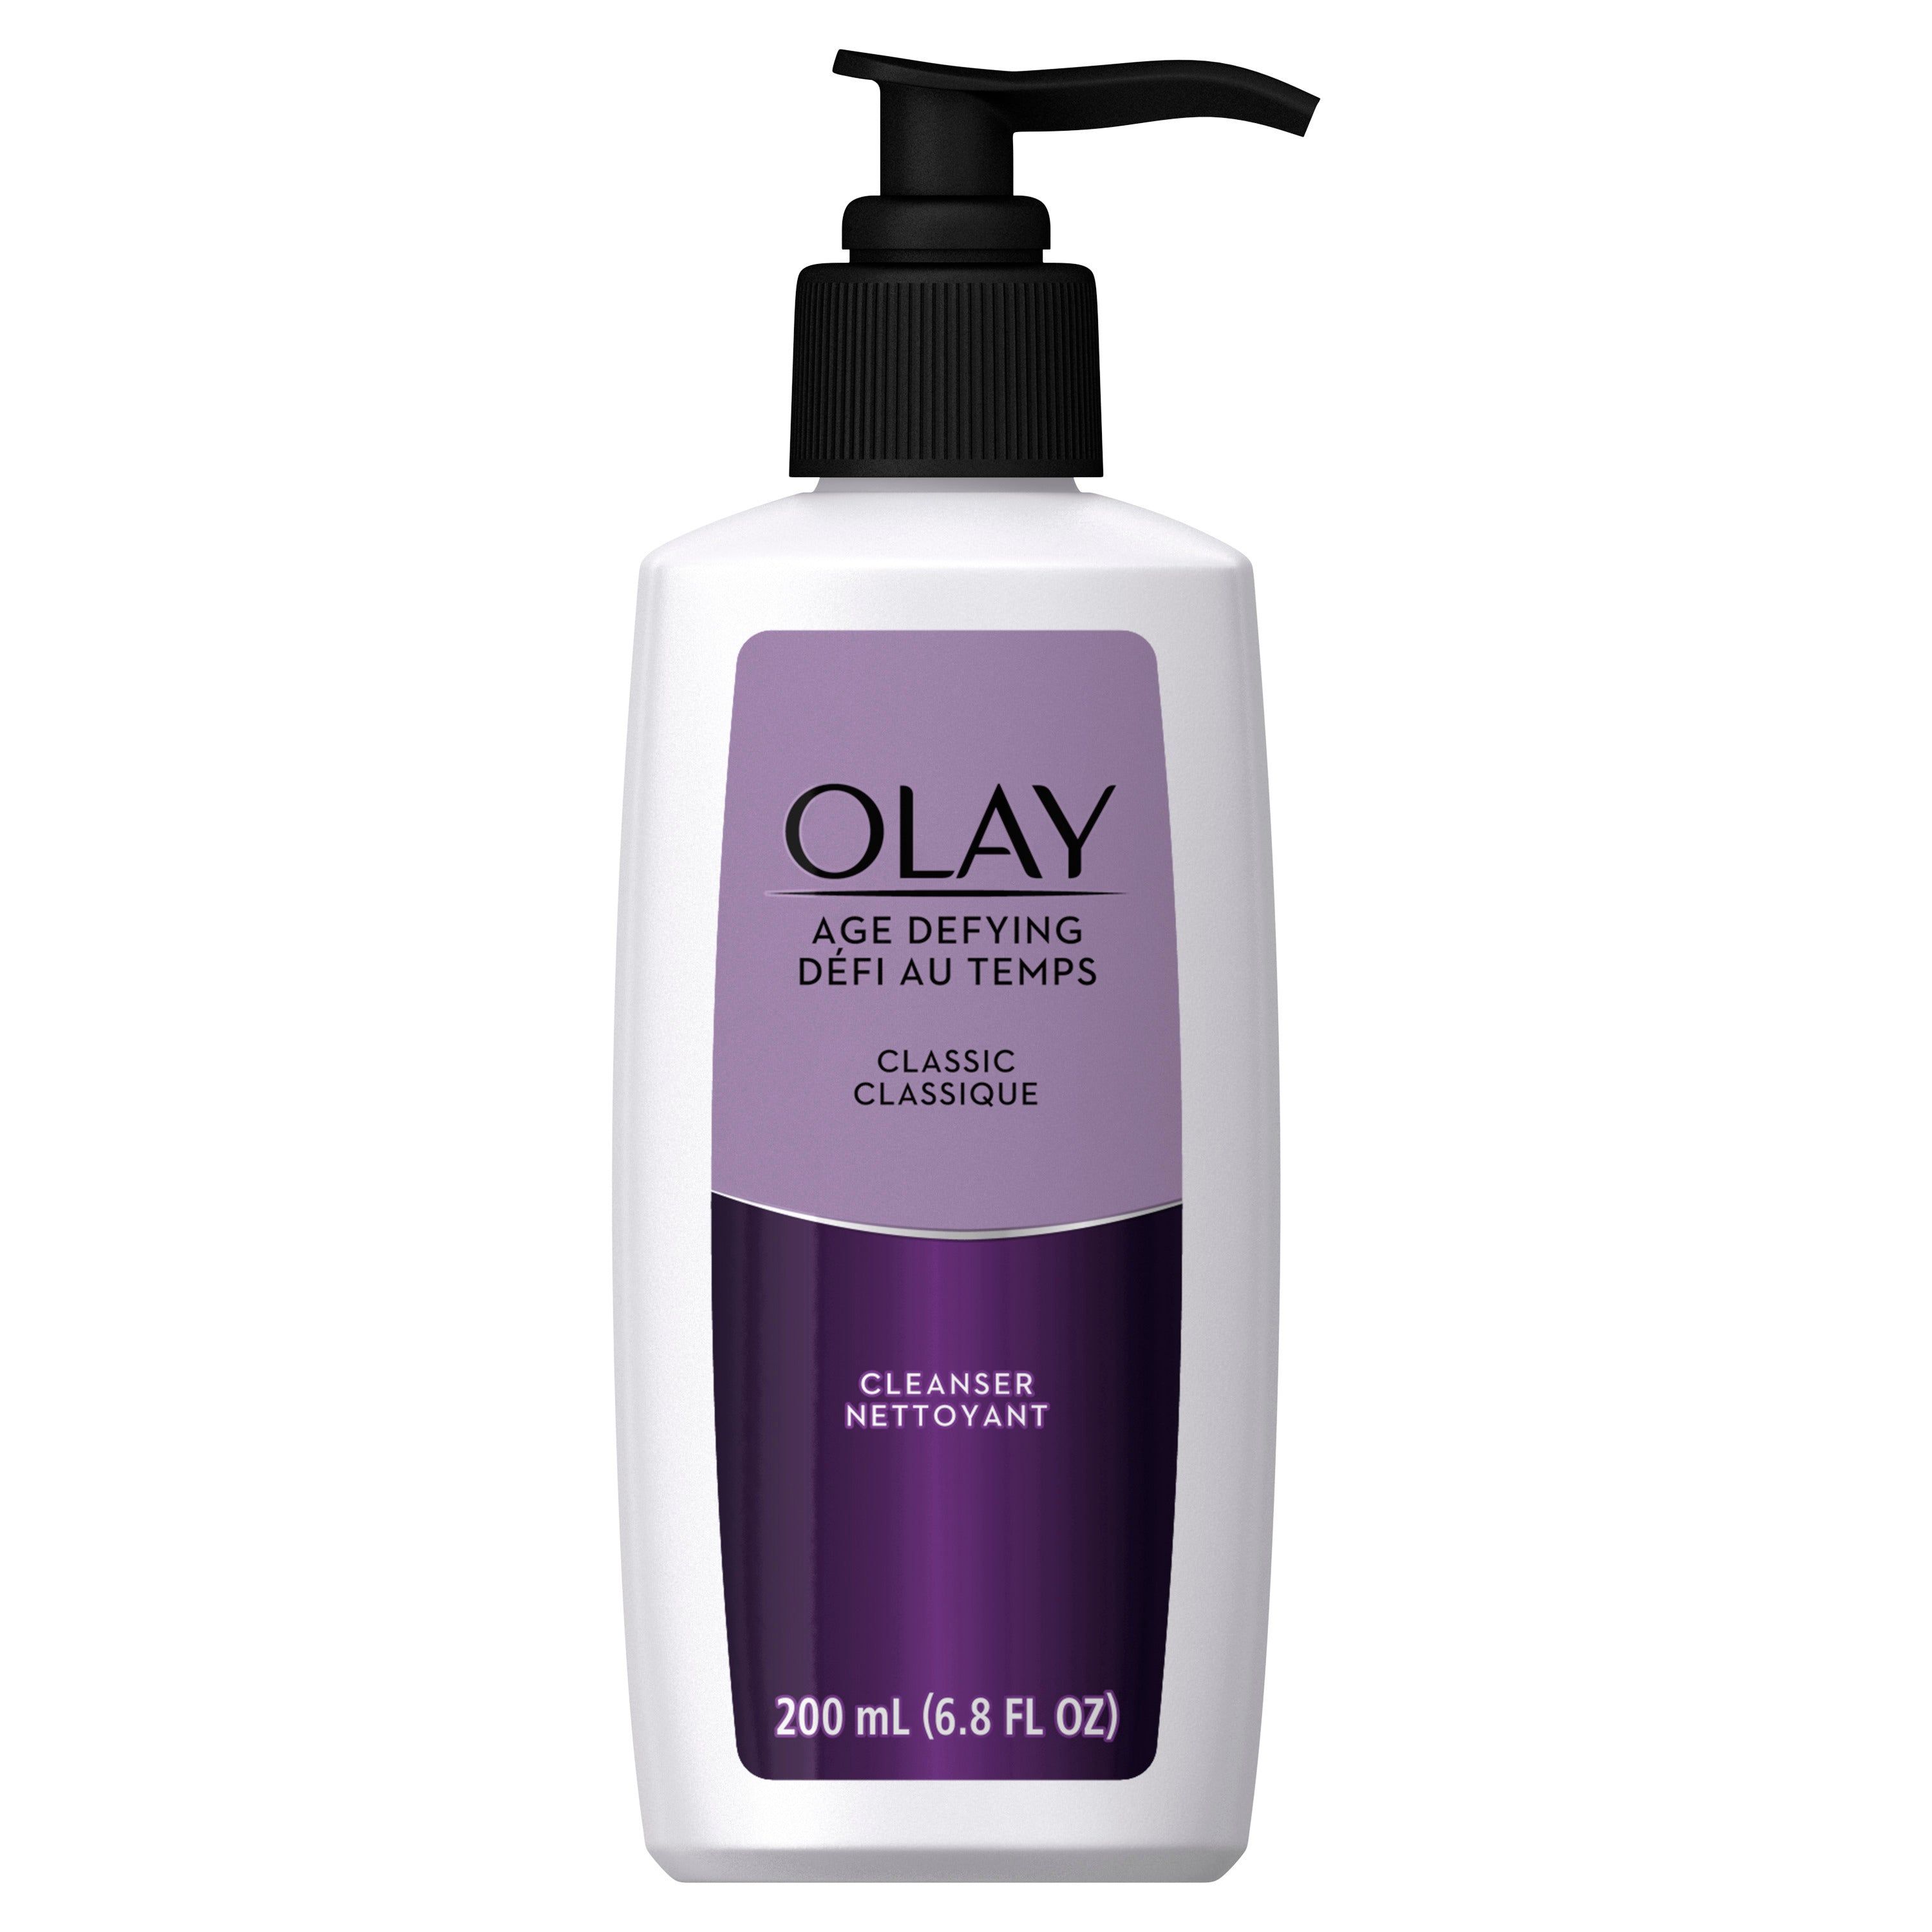 Olay Age Defying Classic Facial Cleanser for Dull Skin, 6.8 fl oz | MTTS322